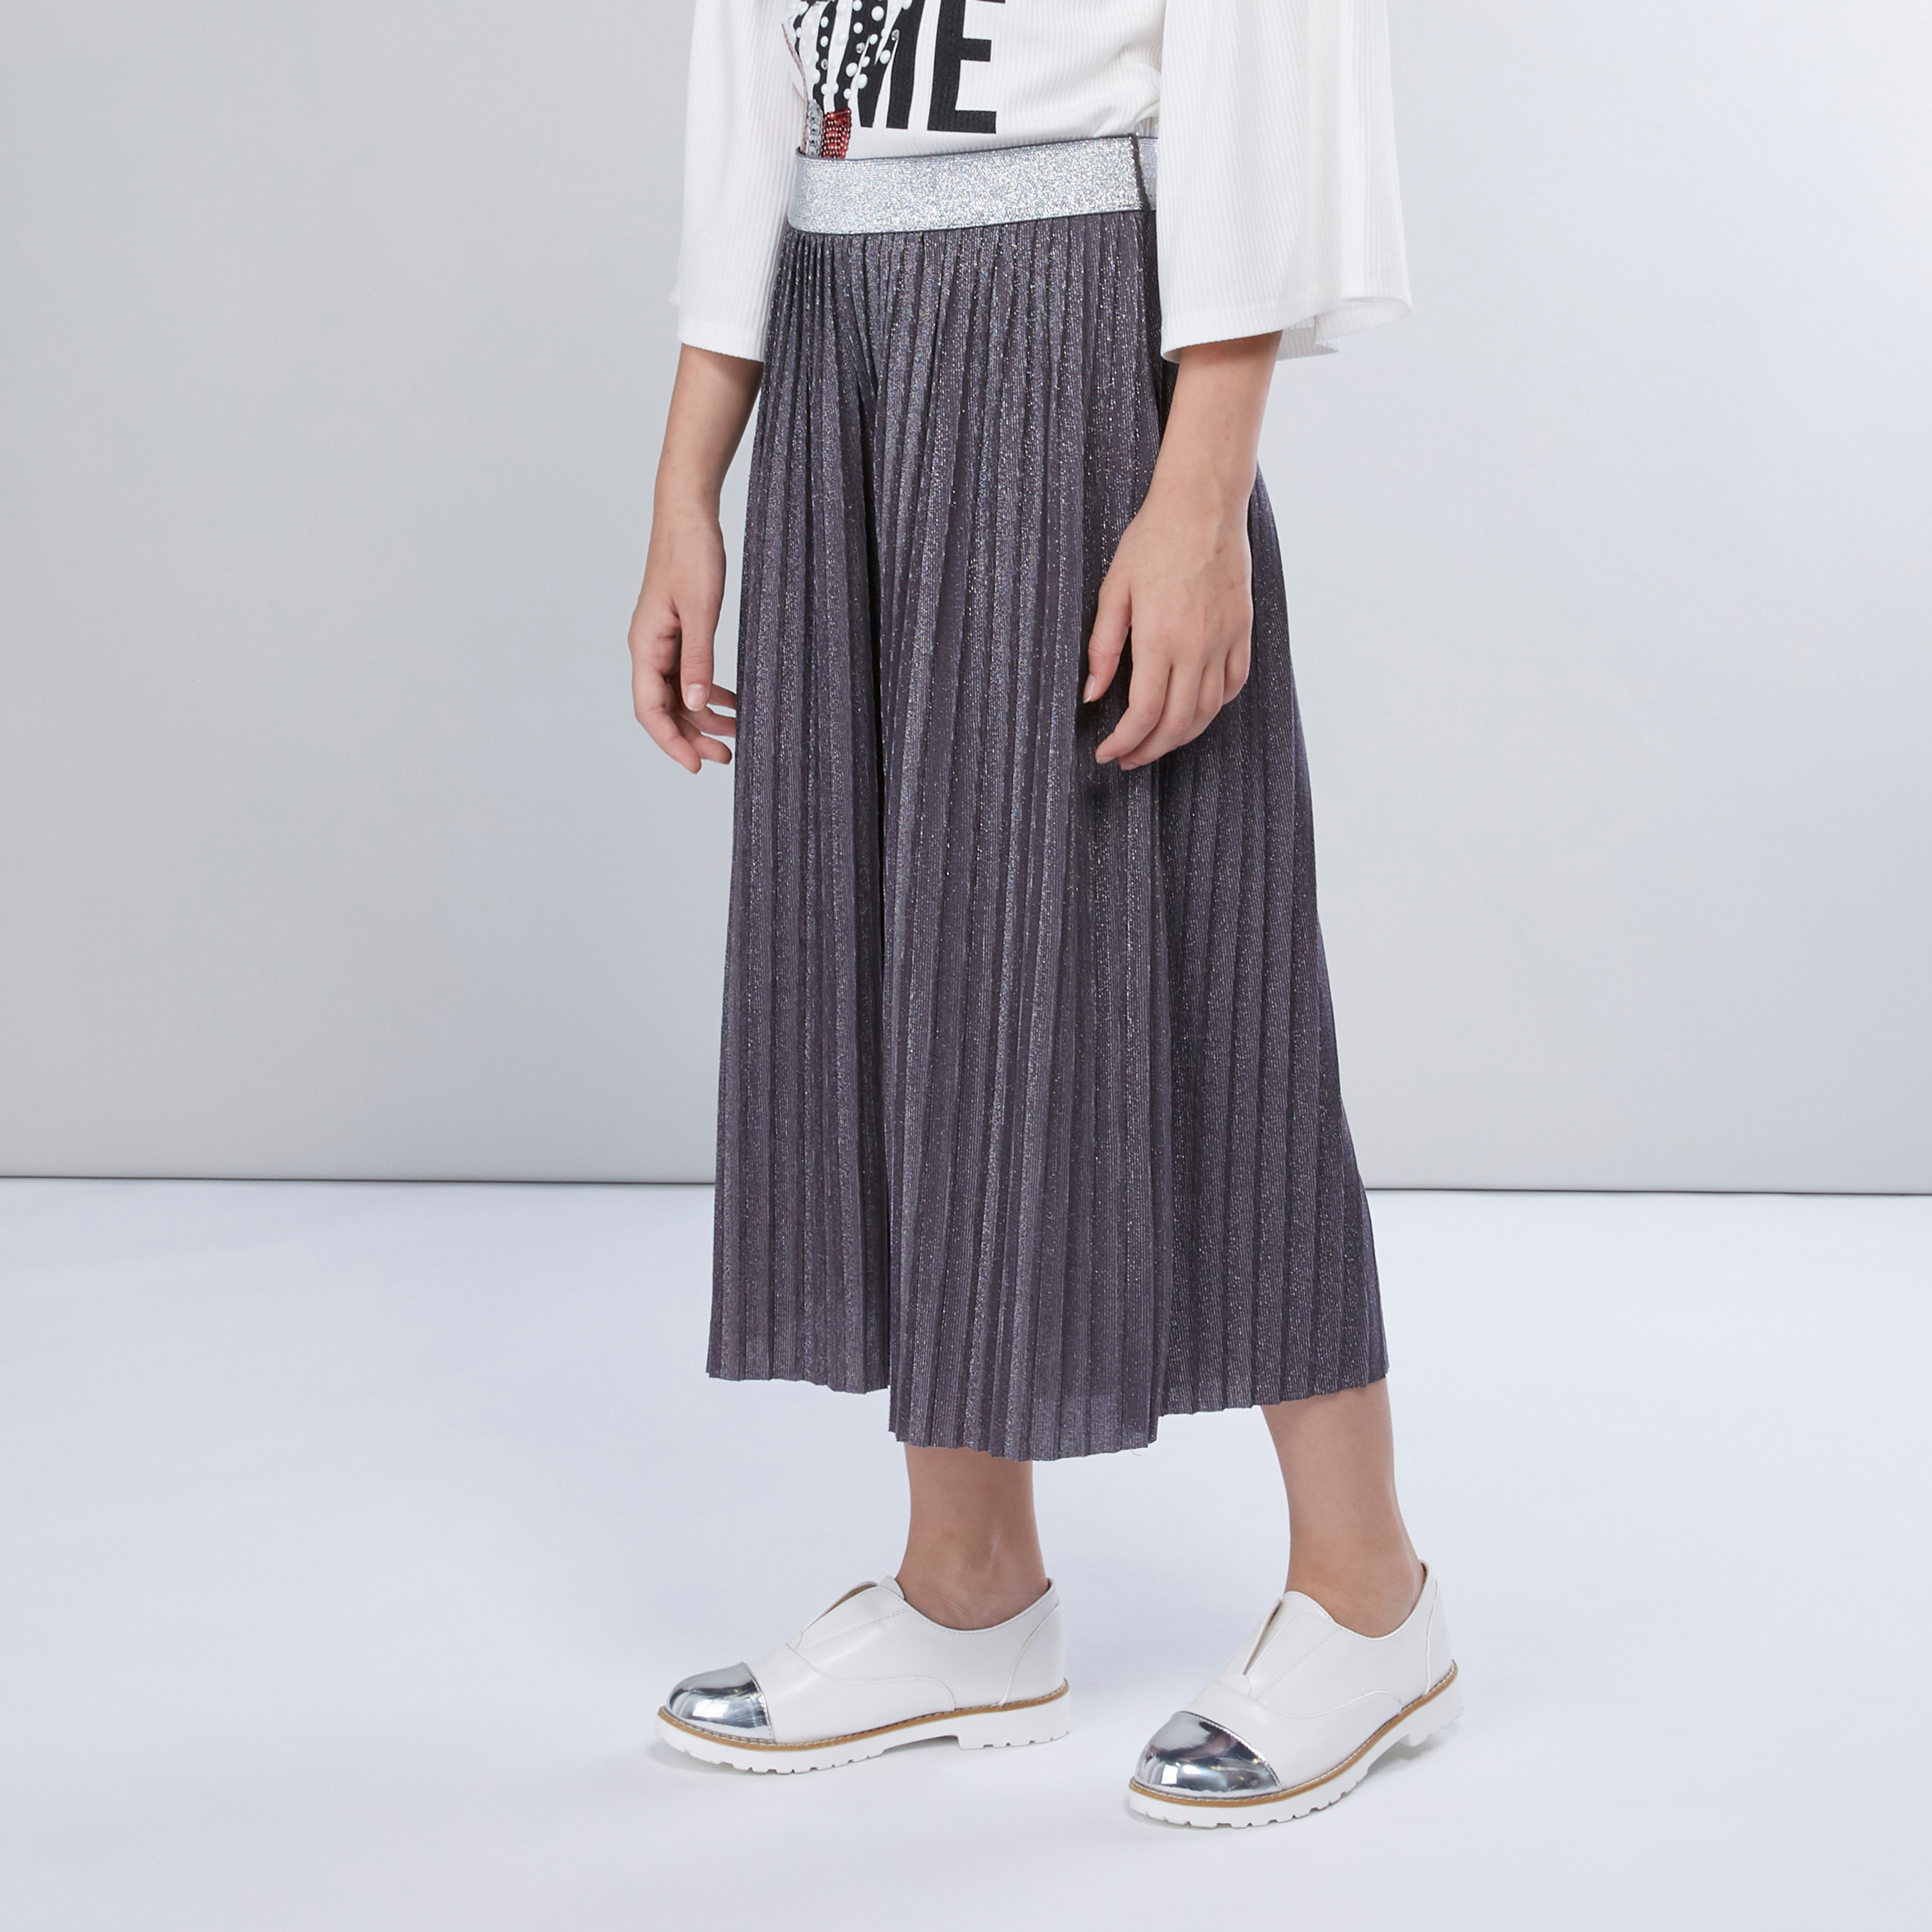 Mango Women's Pleated Culottes Pants | CoolSprings Galleria